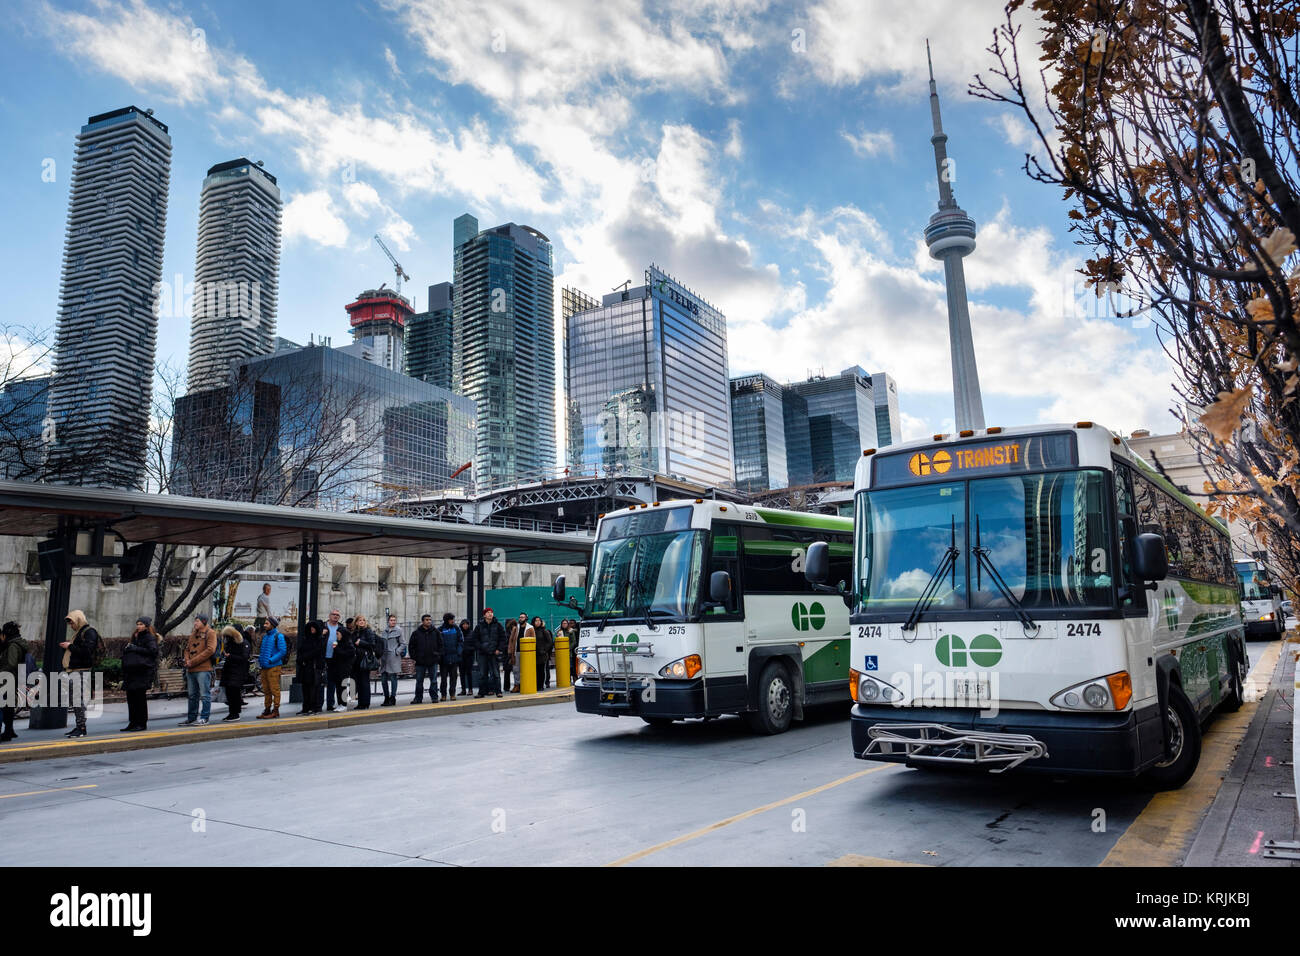 Union Station Bus Terminal, passengers lined-up to board Go buses used for public transportation of commuters living in the GTA region, Toronto. Stock Photo